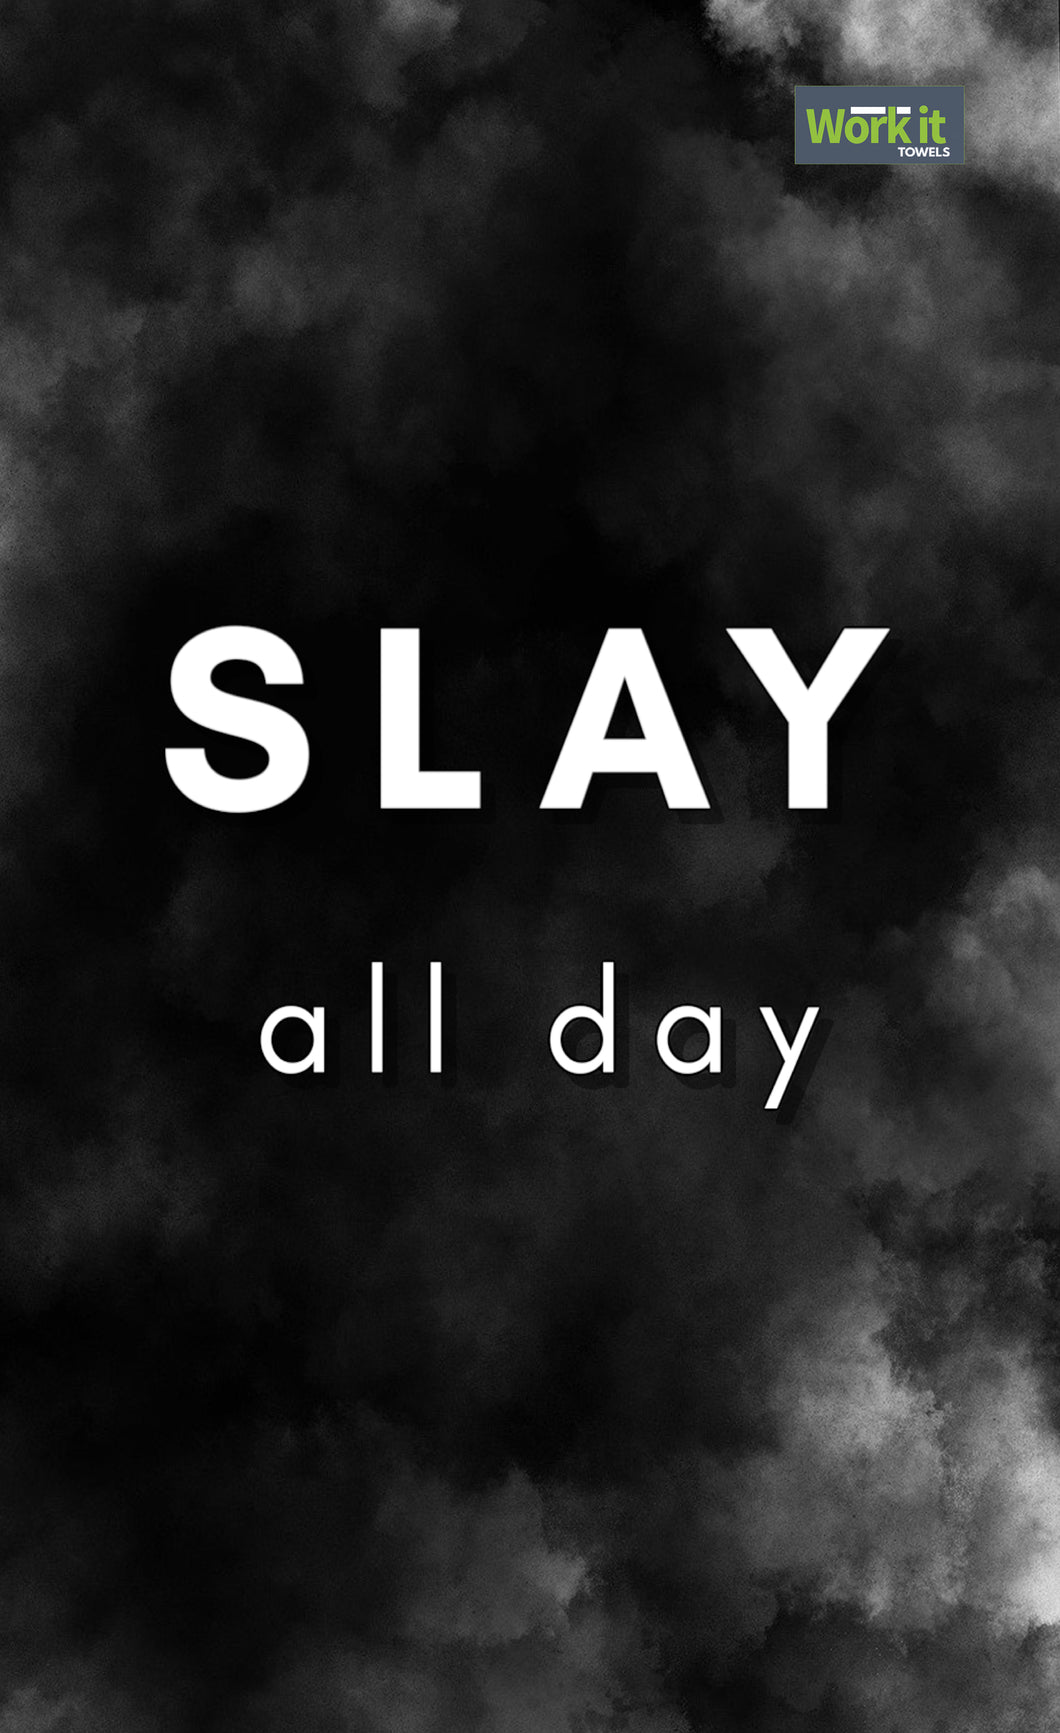 SLAY All Day - work it towels